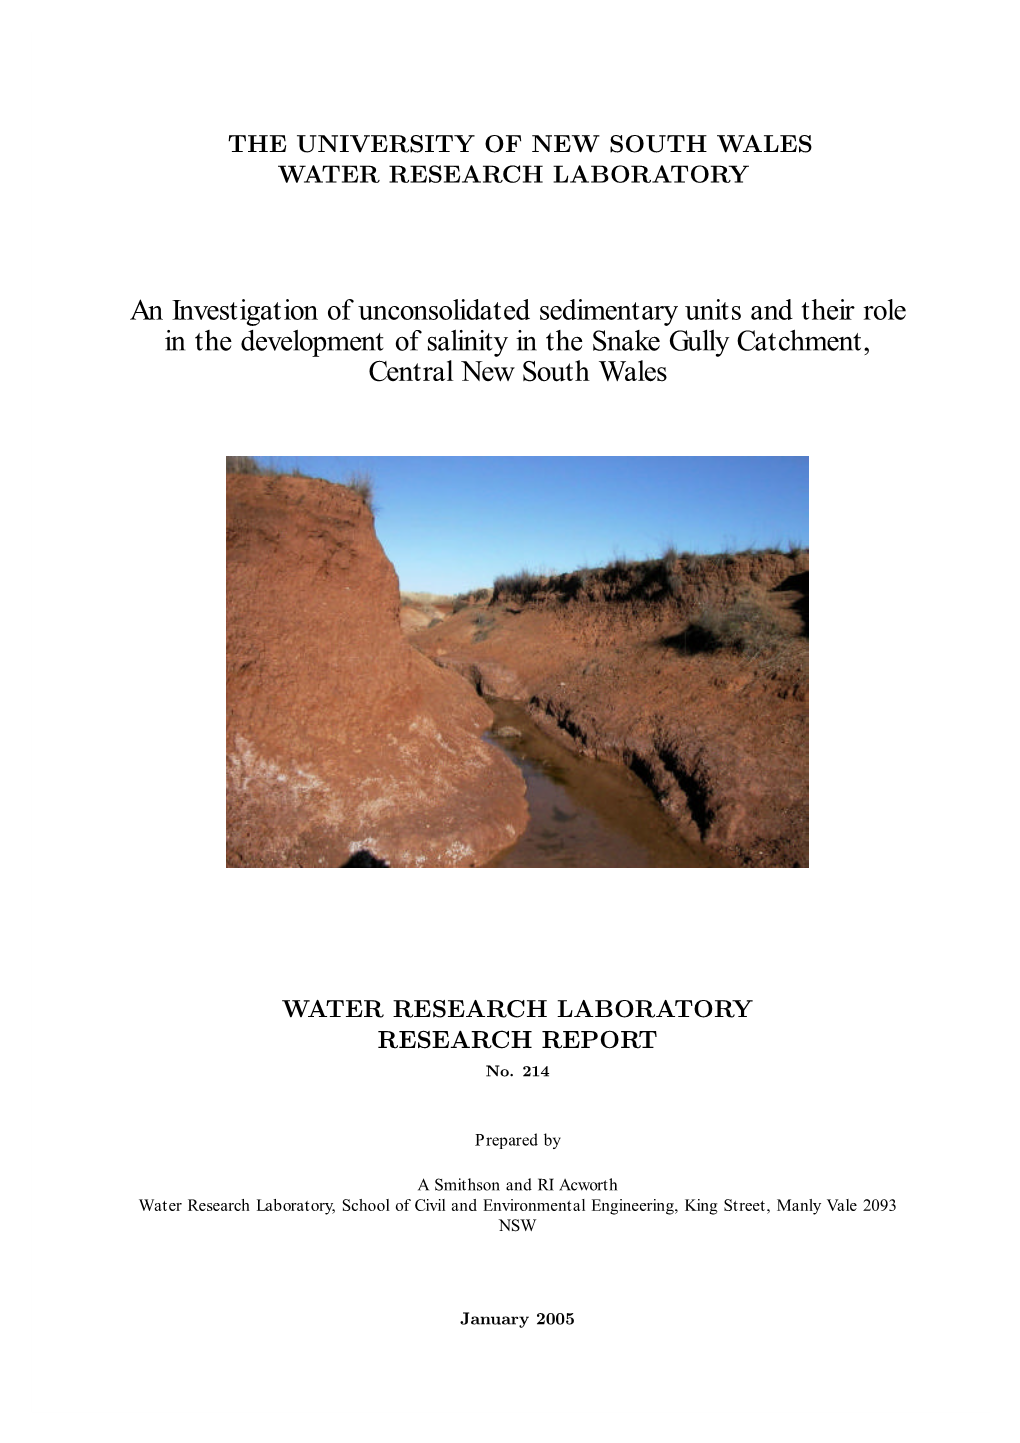 An Investigation of Unconsolidated Sedimentary Units and Their Role in the Development of Salinity in the Snake Gully Catchment, Central New South Wales